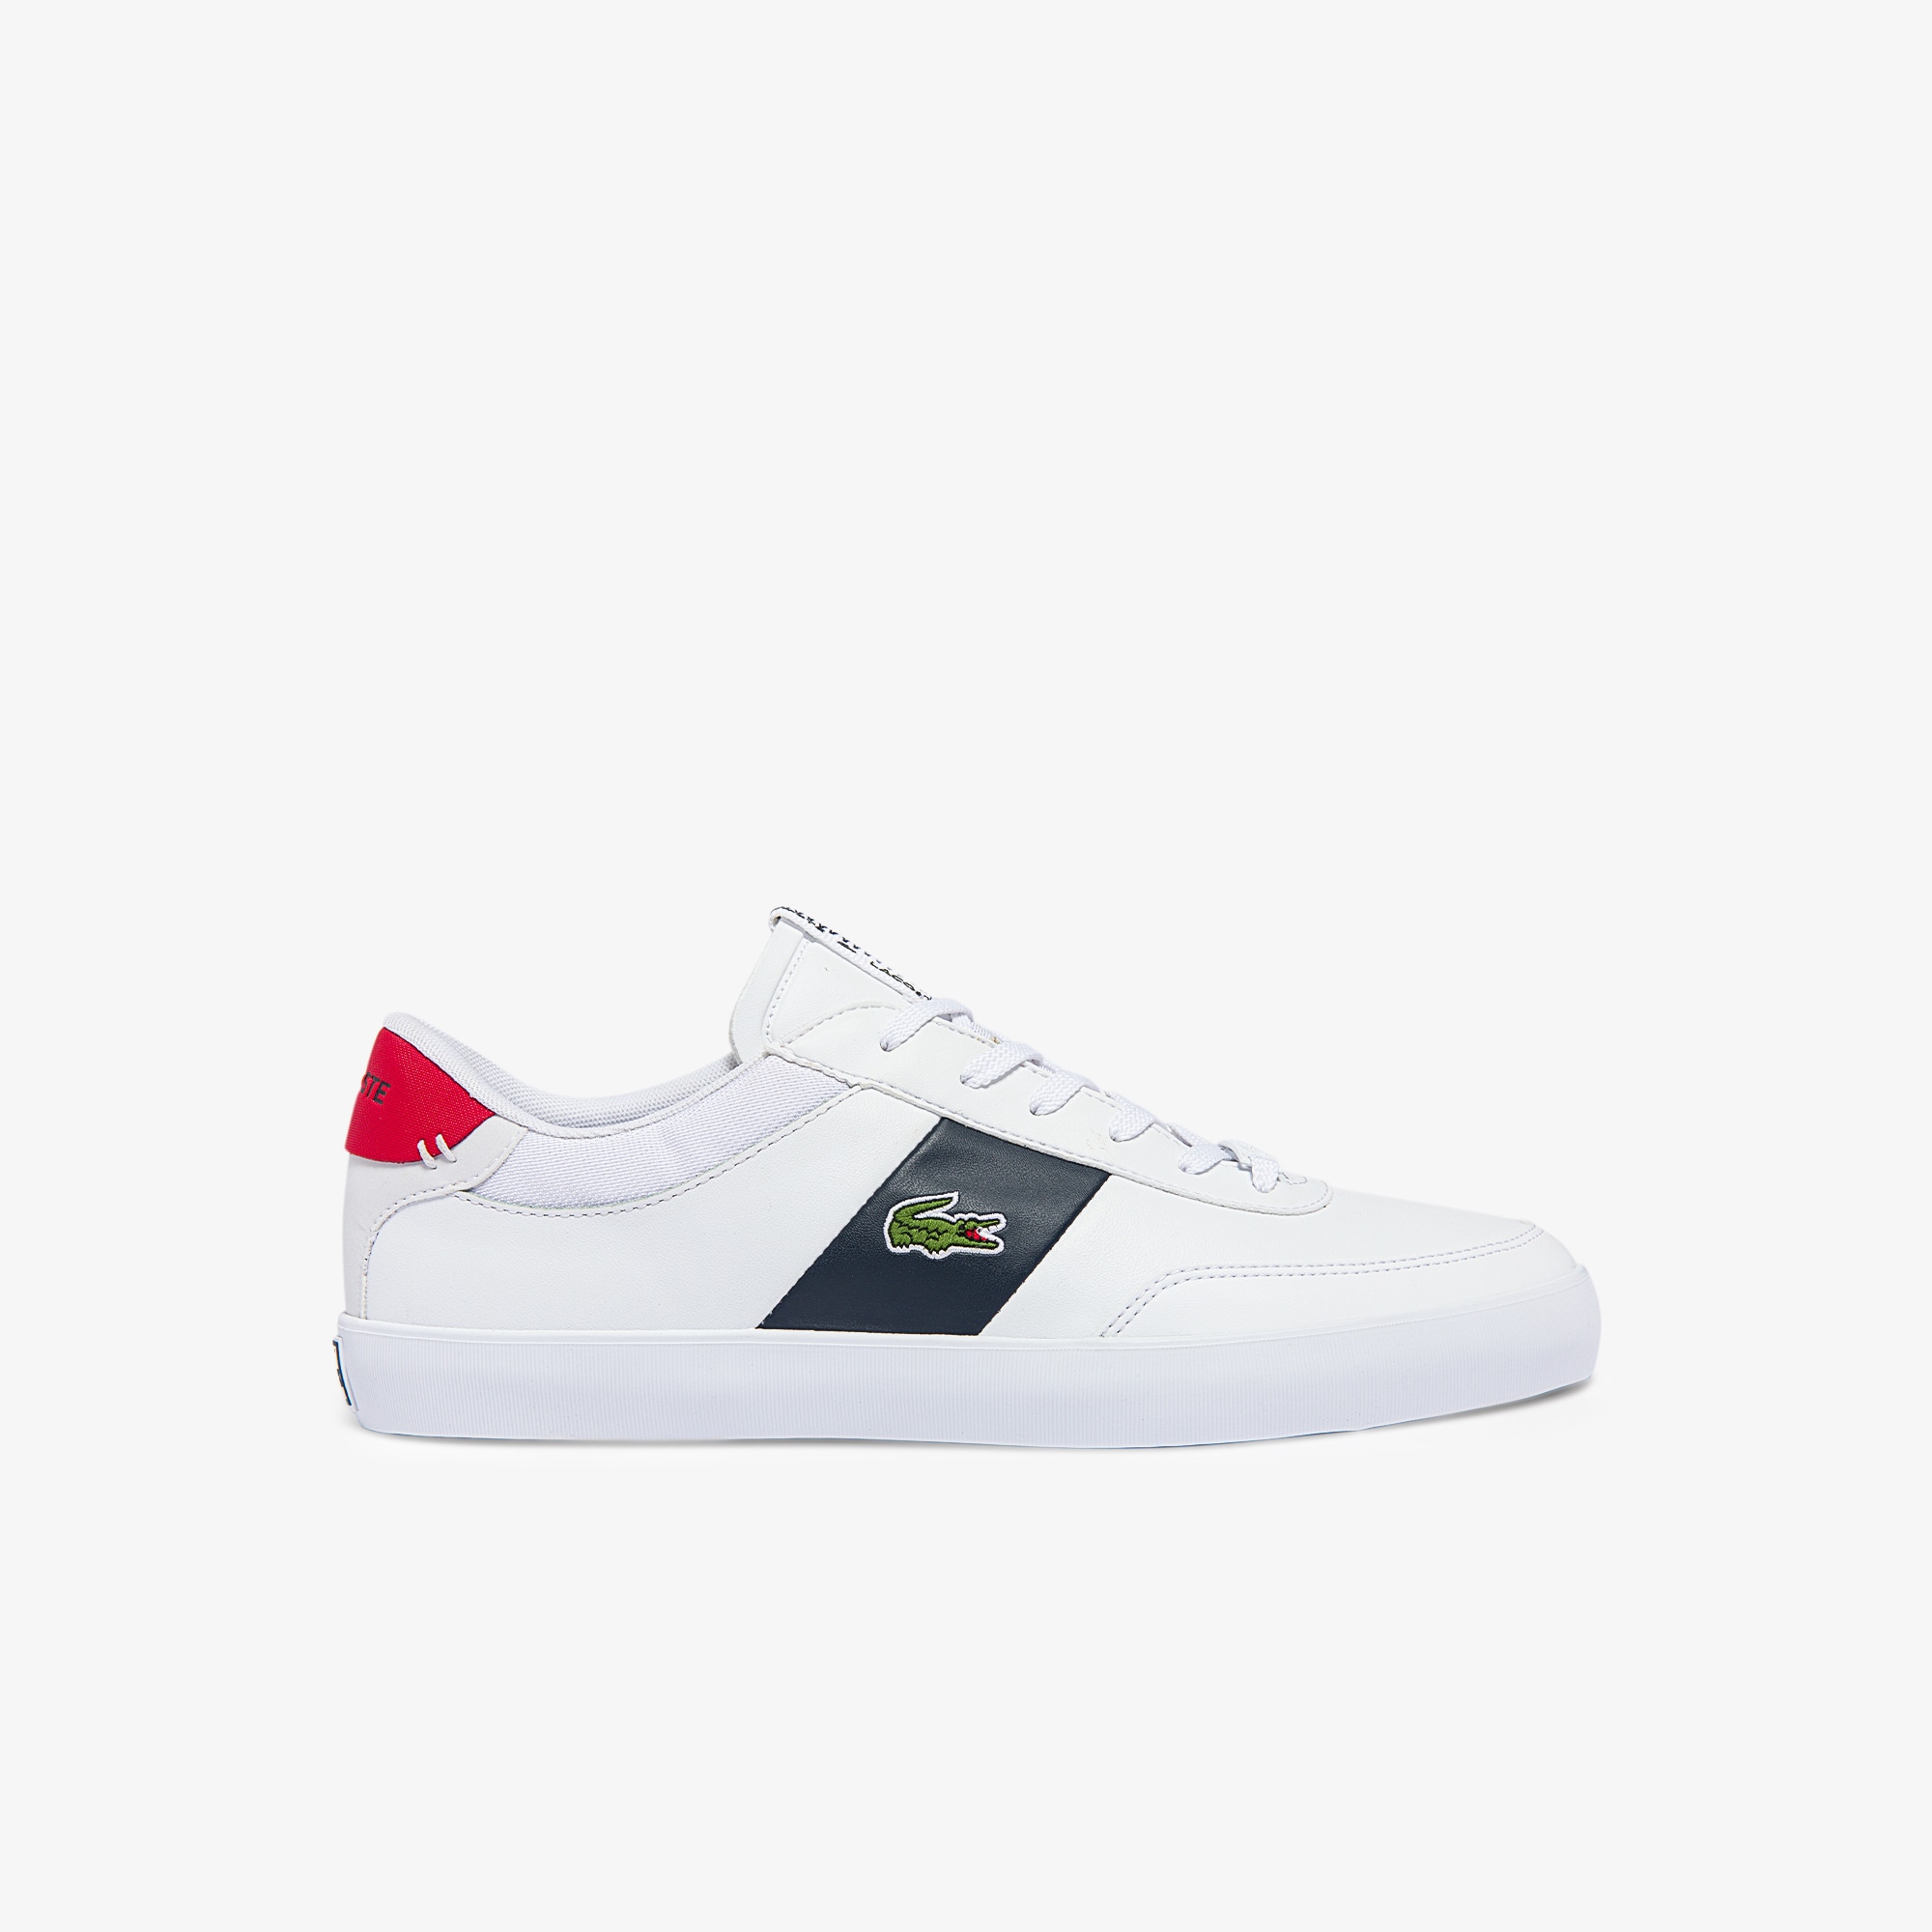 Lacoste Men's Court-Master Leather and Synthetic Trainers Size 11 UK White, Navy & Red